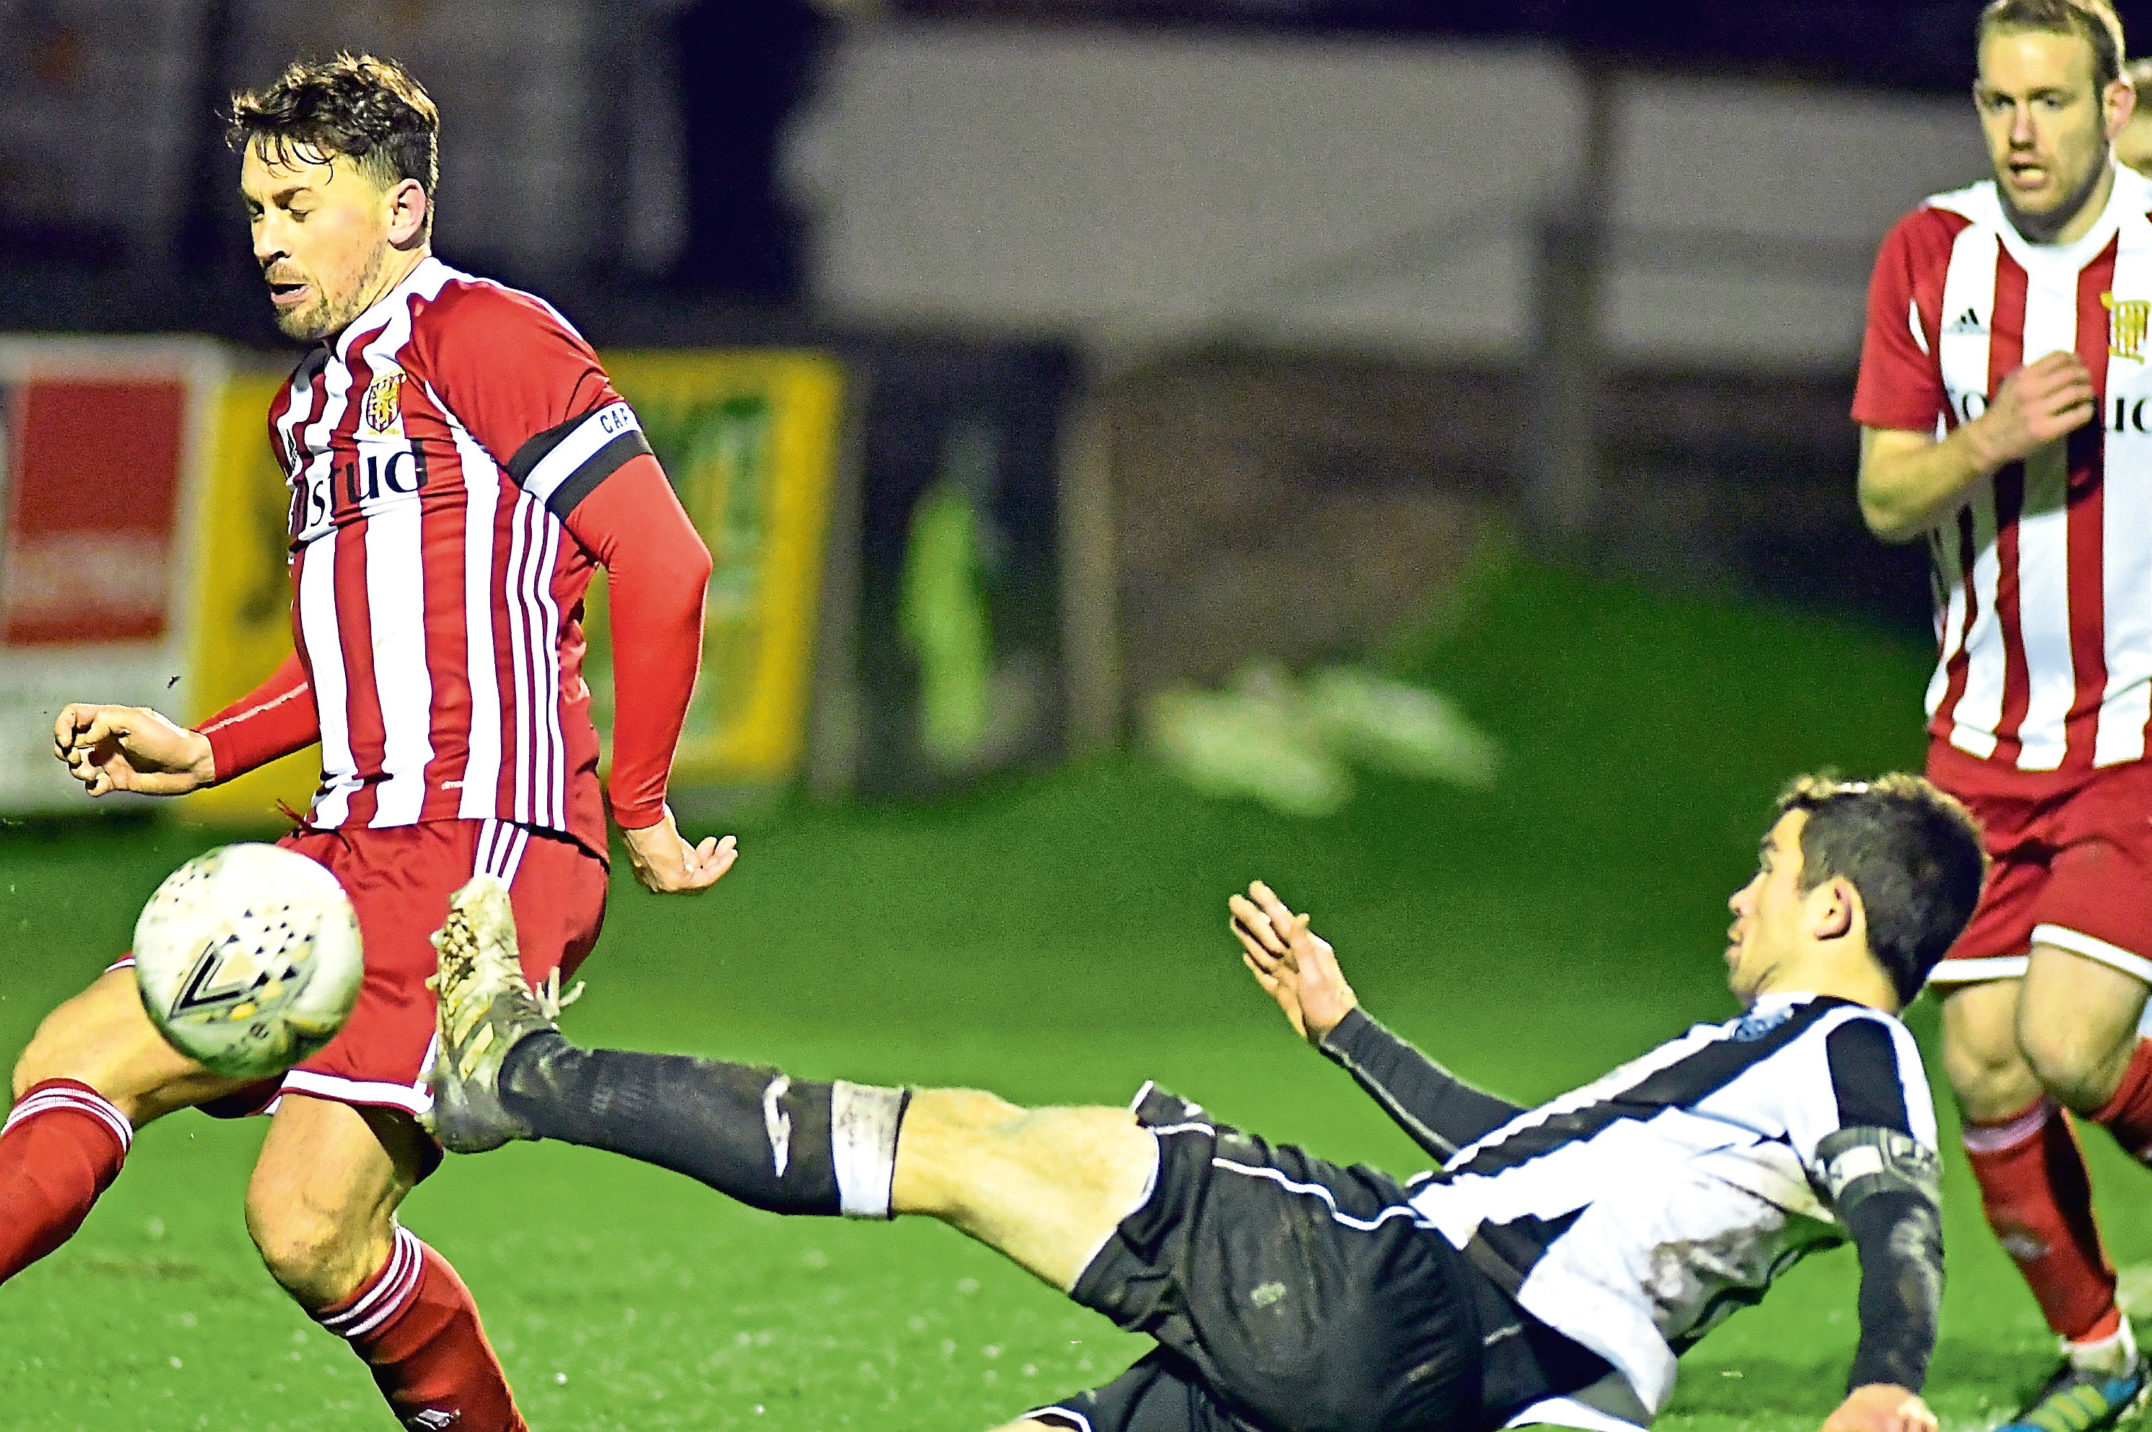 Fraserburgh's Willie West and Formartine's Stuart Anderson.
Picture by Chris Sumner